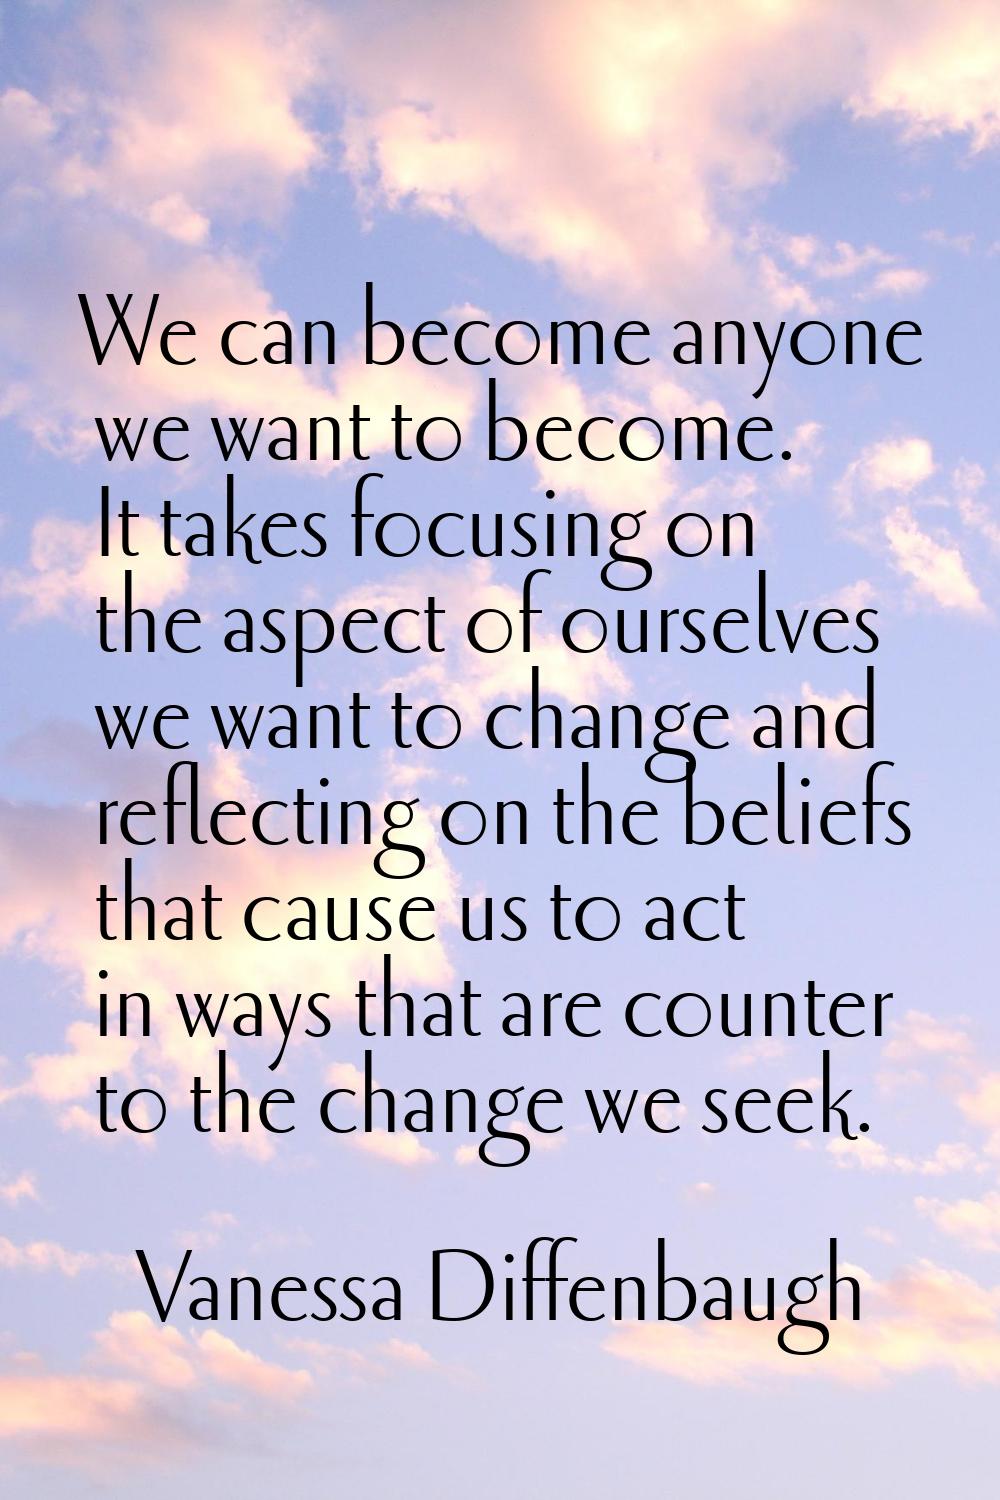 We can become anyone we want to become. It takes focusing on the aspect of ourselves we want to cha